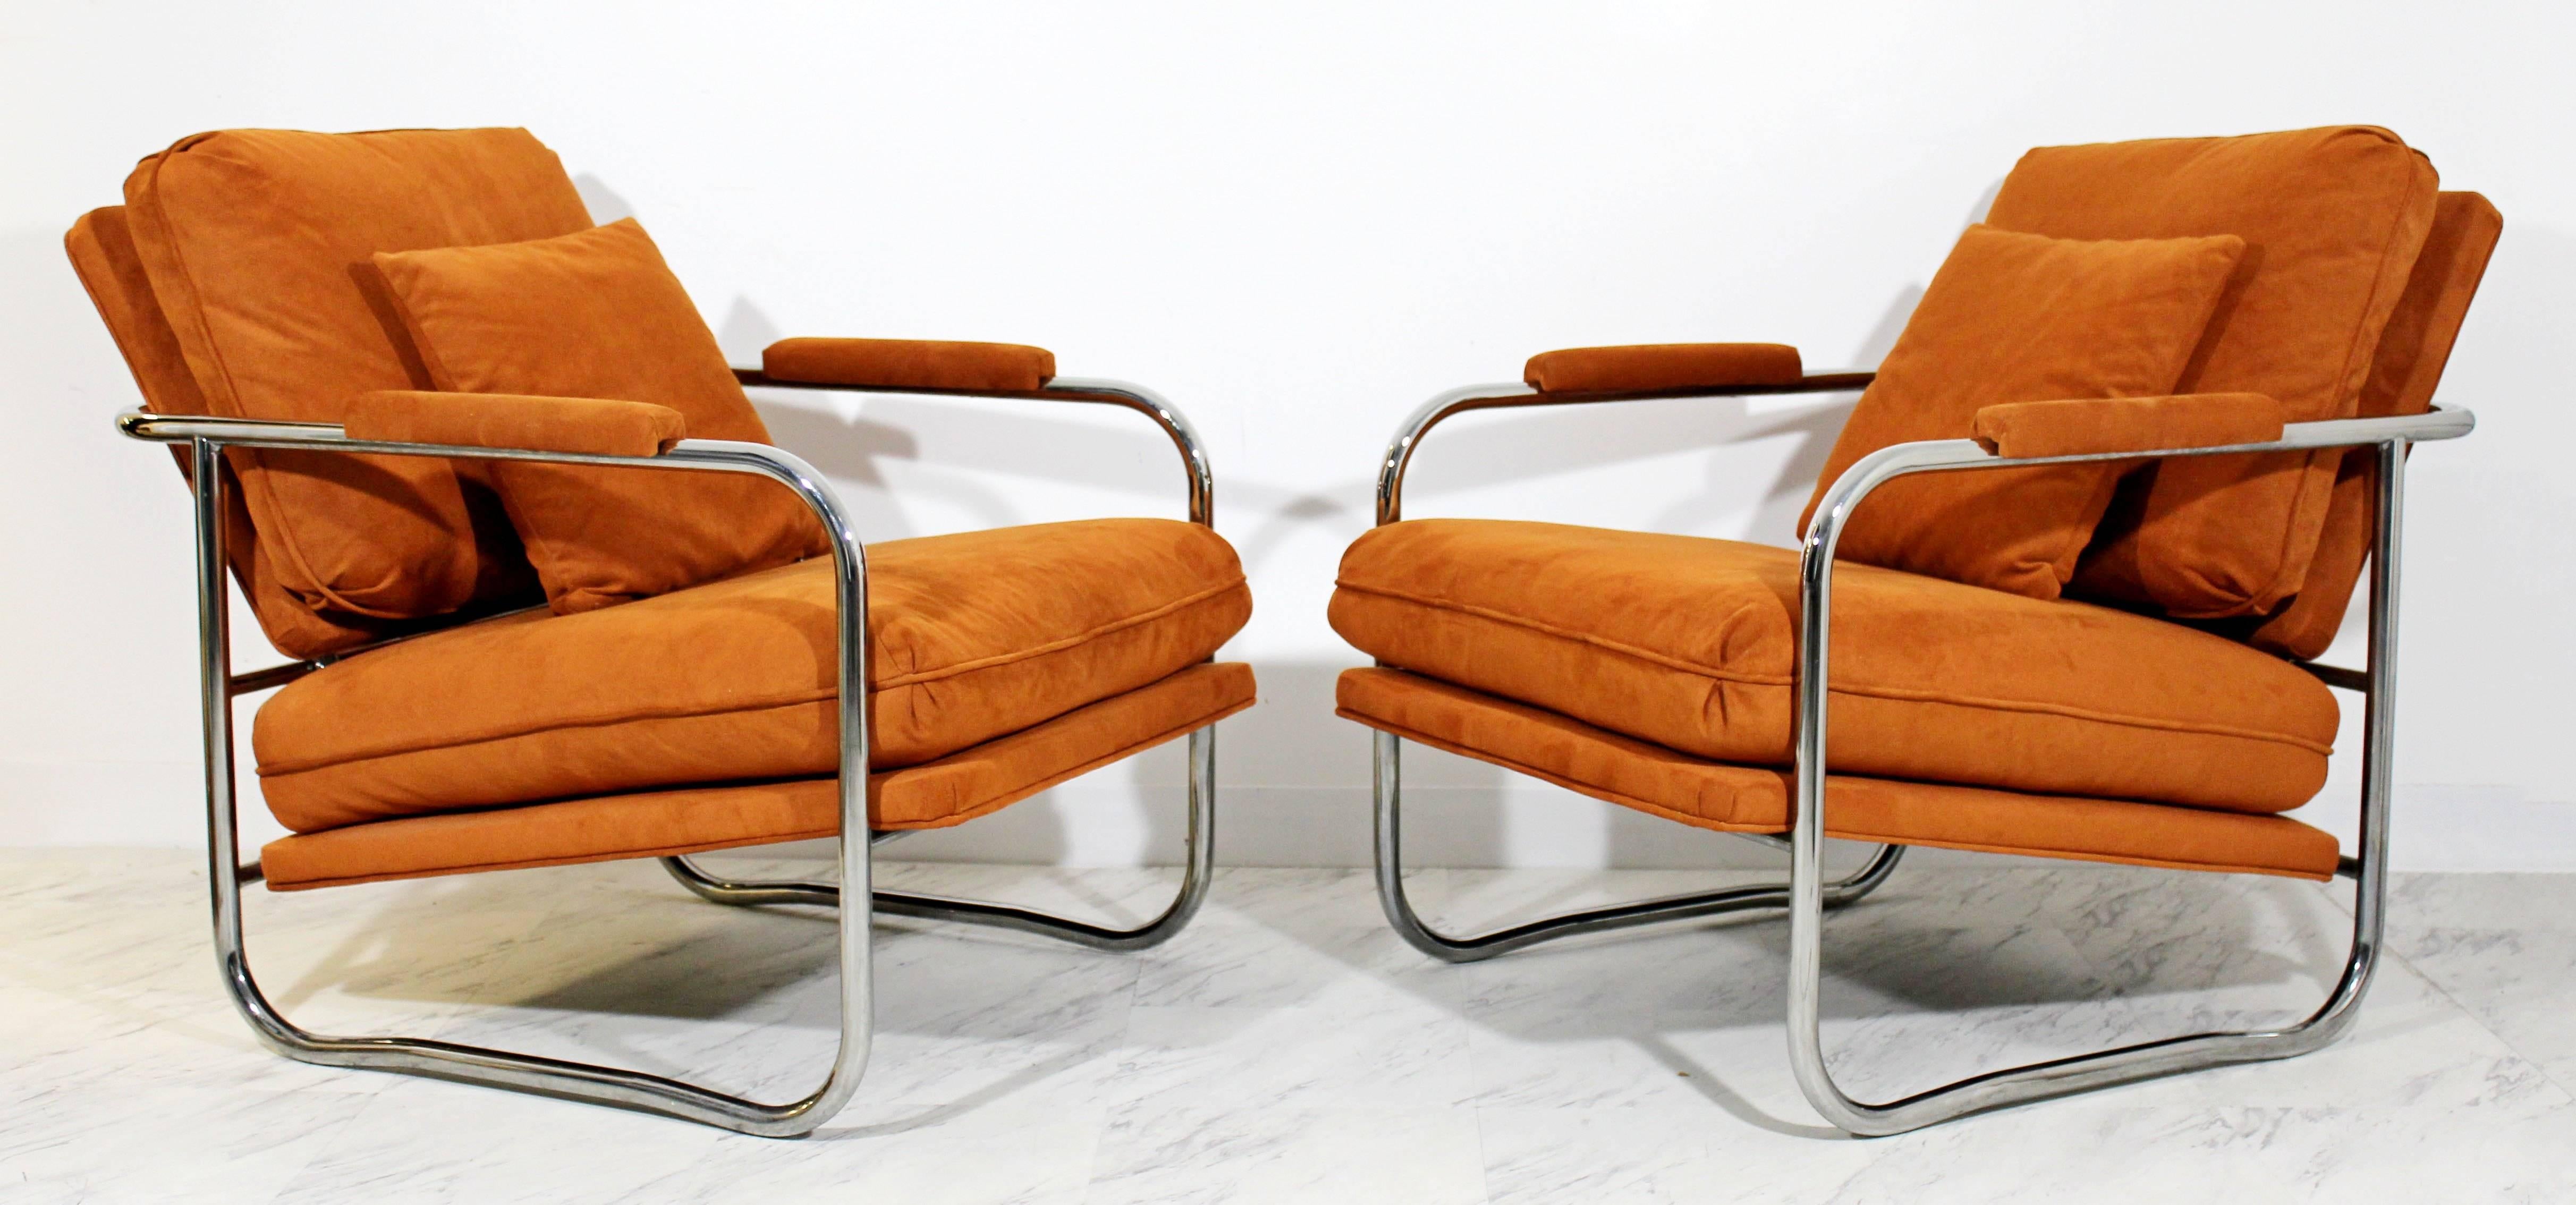 American Mid-Century Modern Pair of Tubular Chrome Lounge Chairs and Ottoman